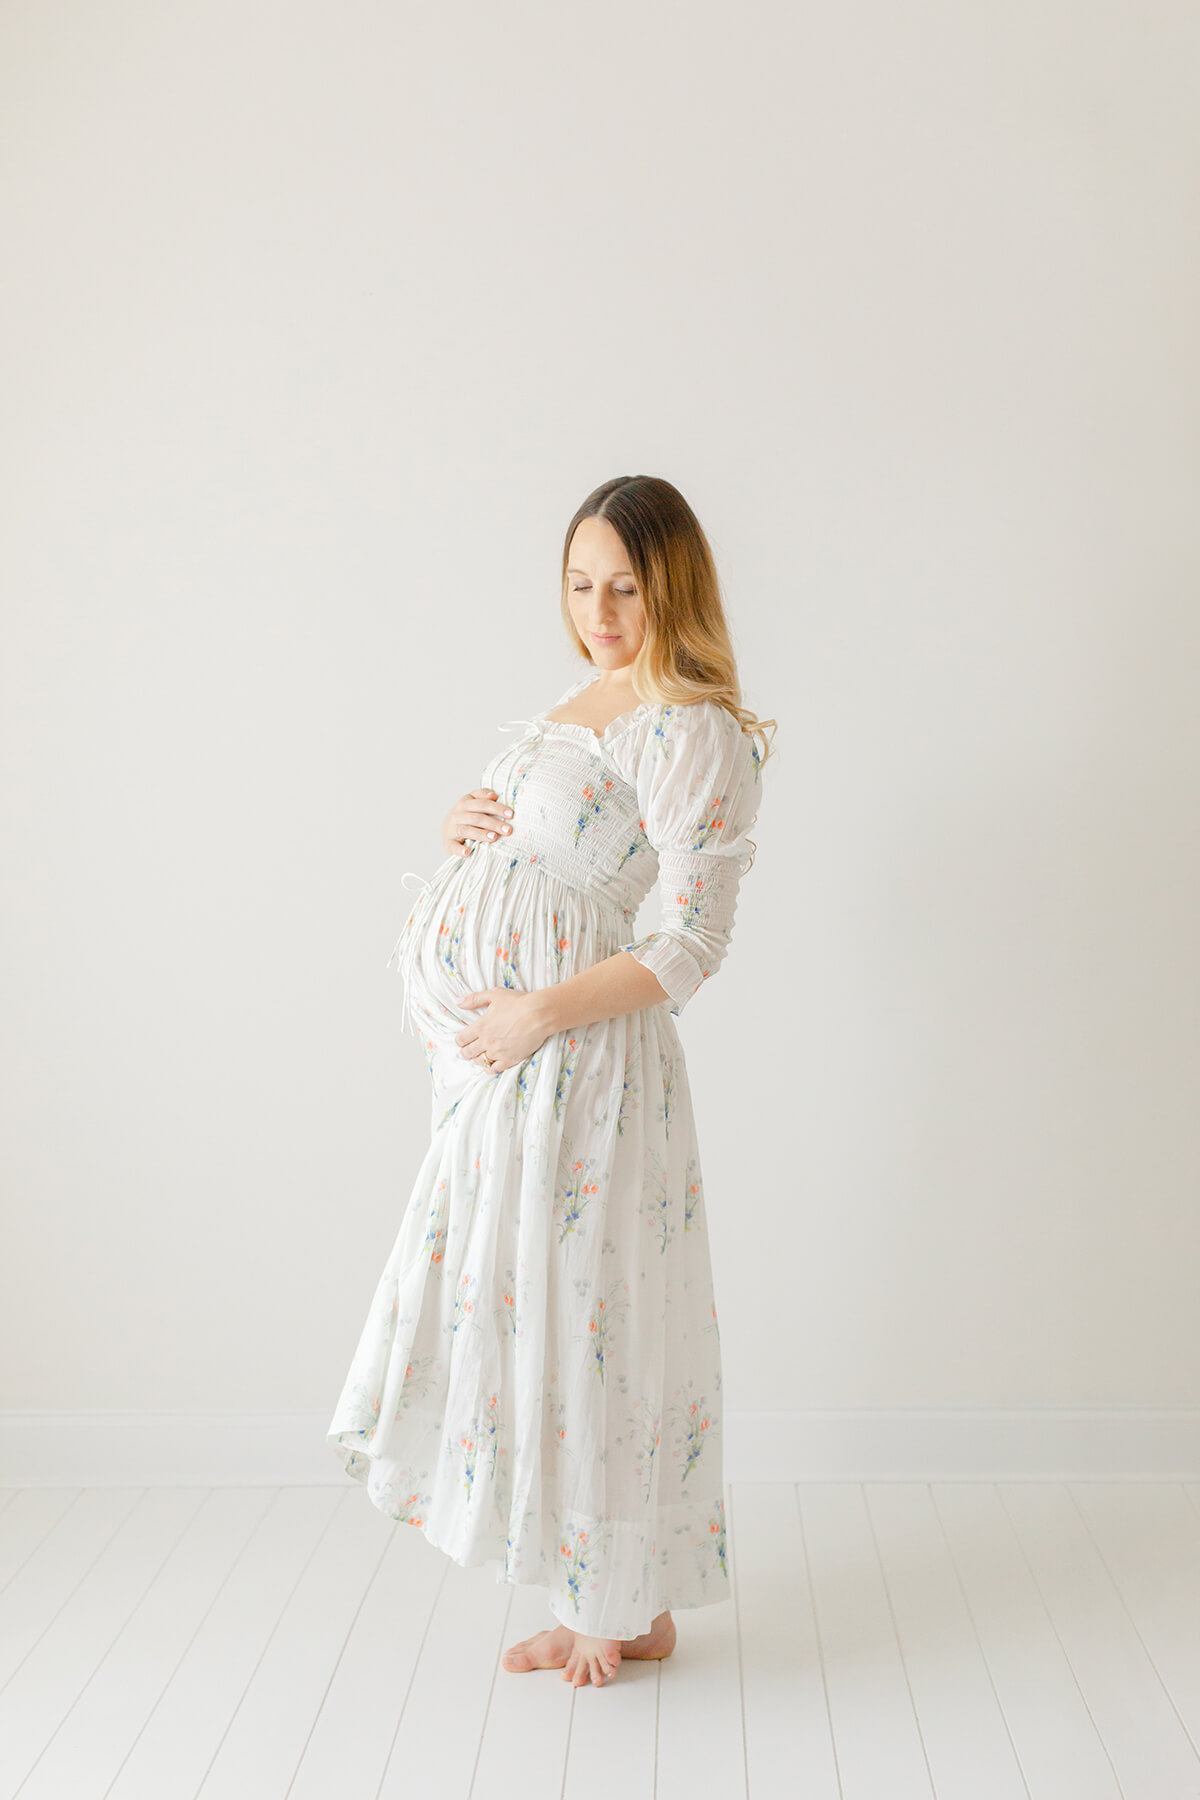 image of stunning mother expecting her second baby in maternity photography studio in birmingham AL